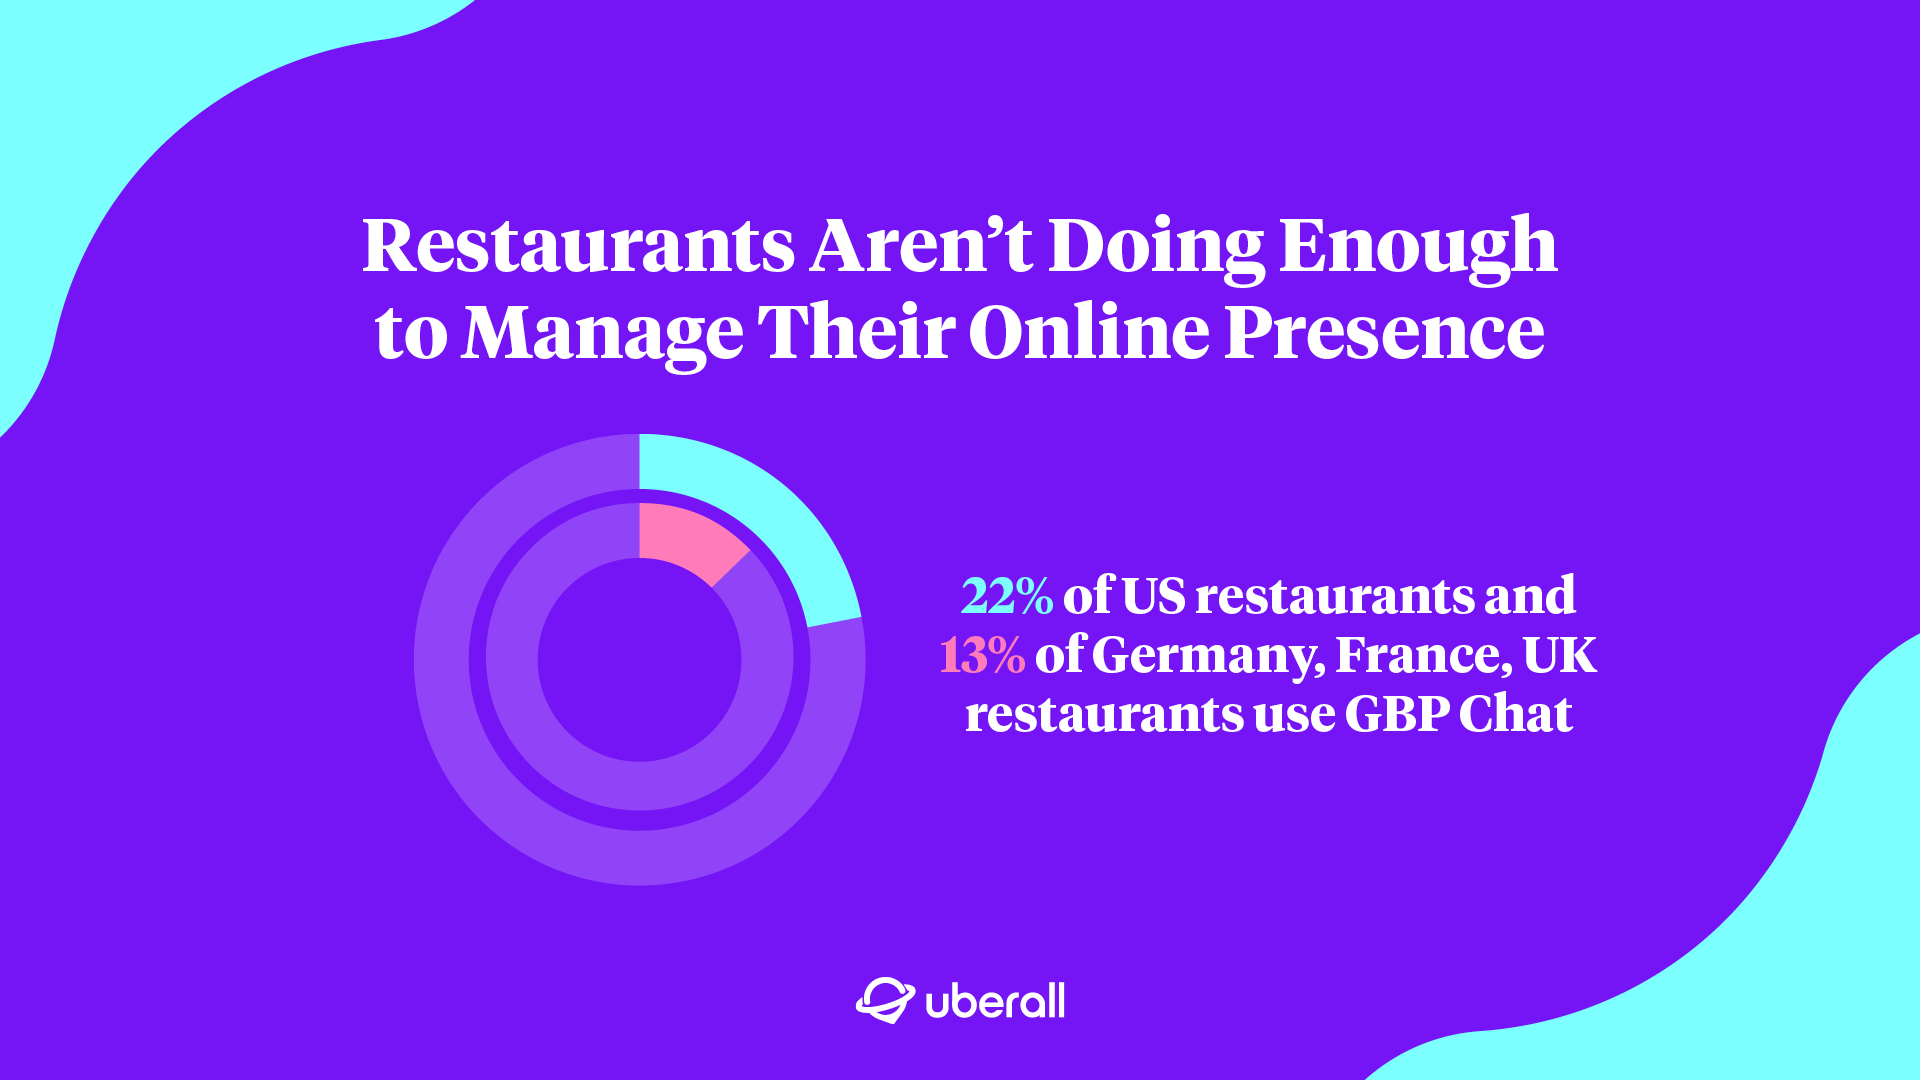 Restaurants aren't doing enough to manage their online presence